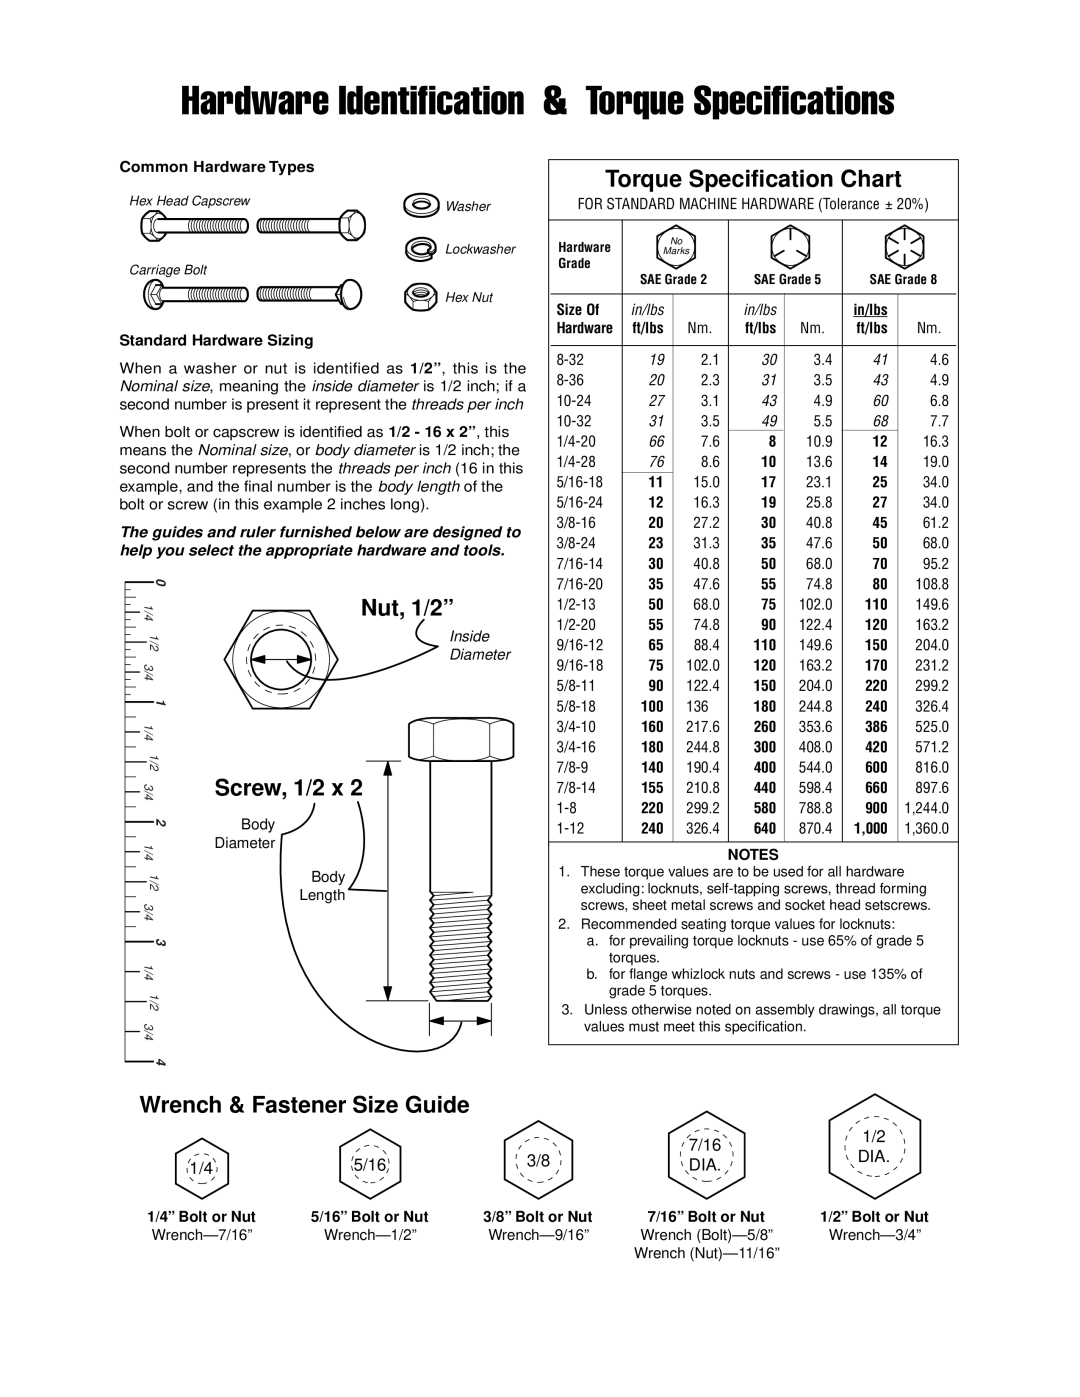 Snapper 2006 Rapid Wrench & Fastener Size Guide, Hardware Identification & Torque Specifications, Nut, 1/2”, Screw, 1/2 x 